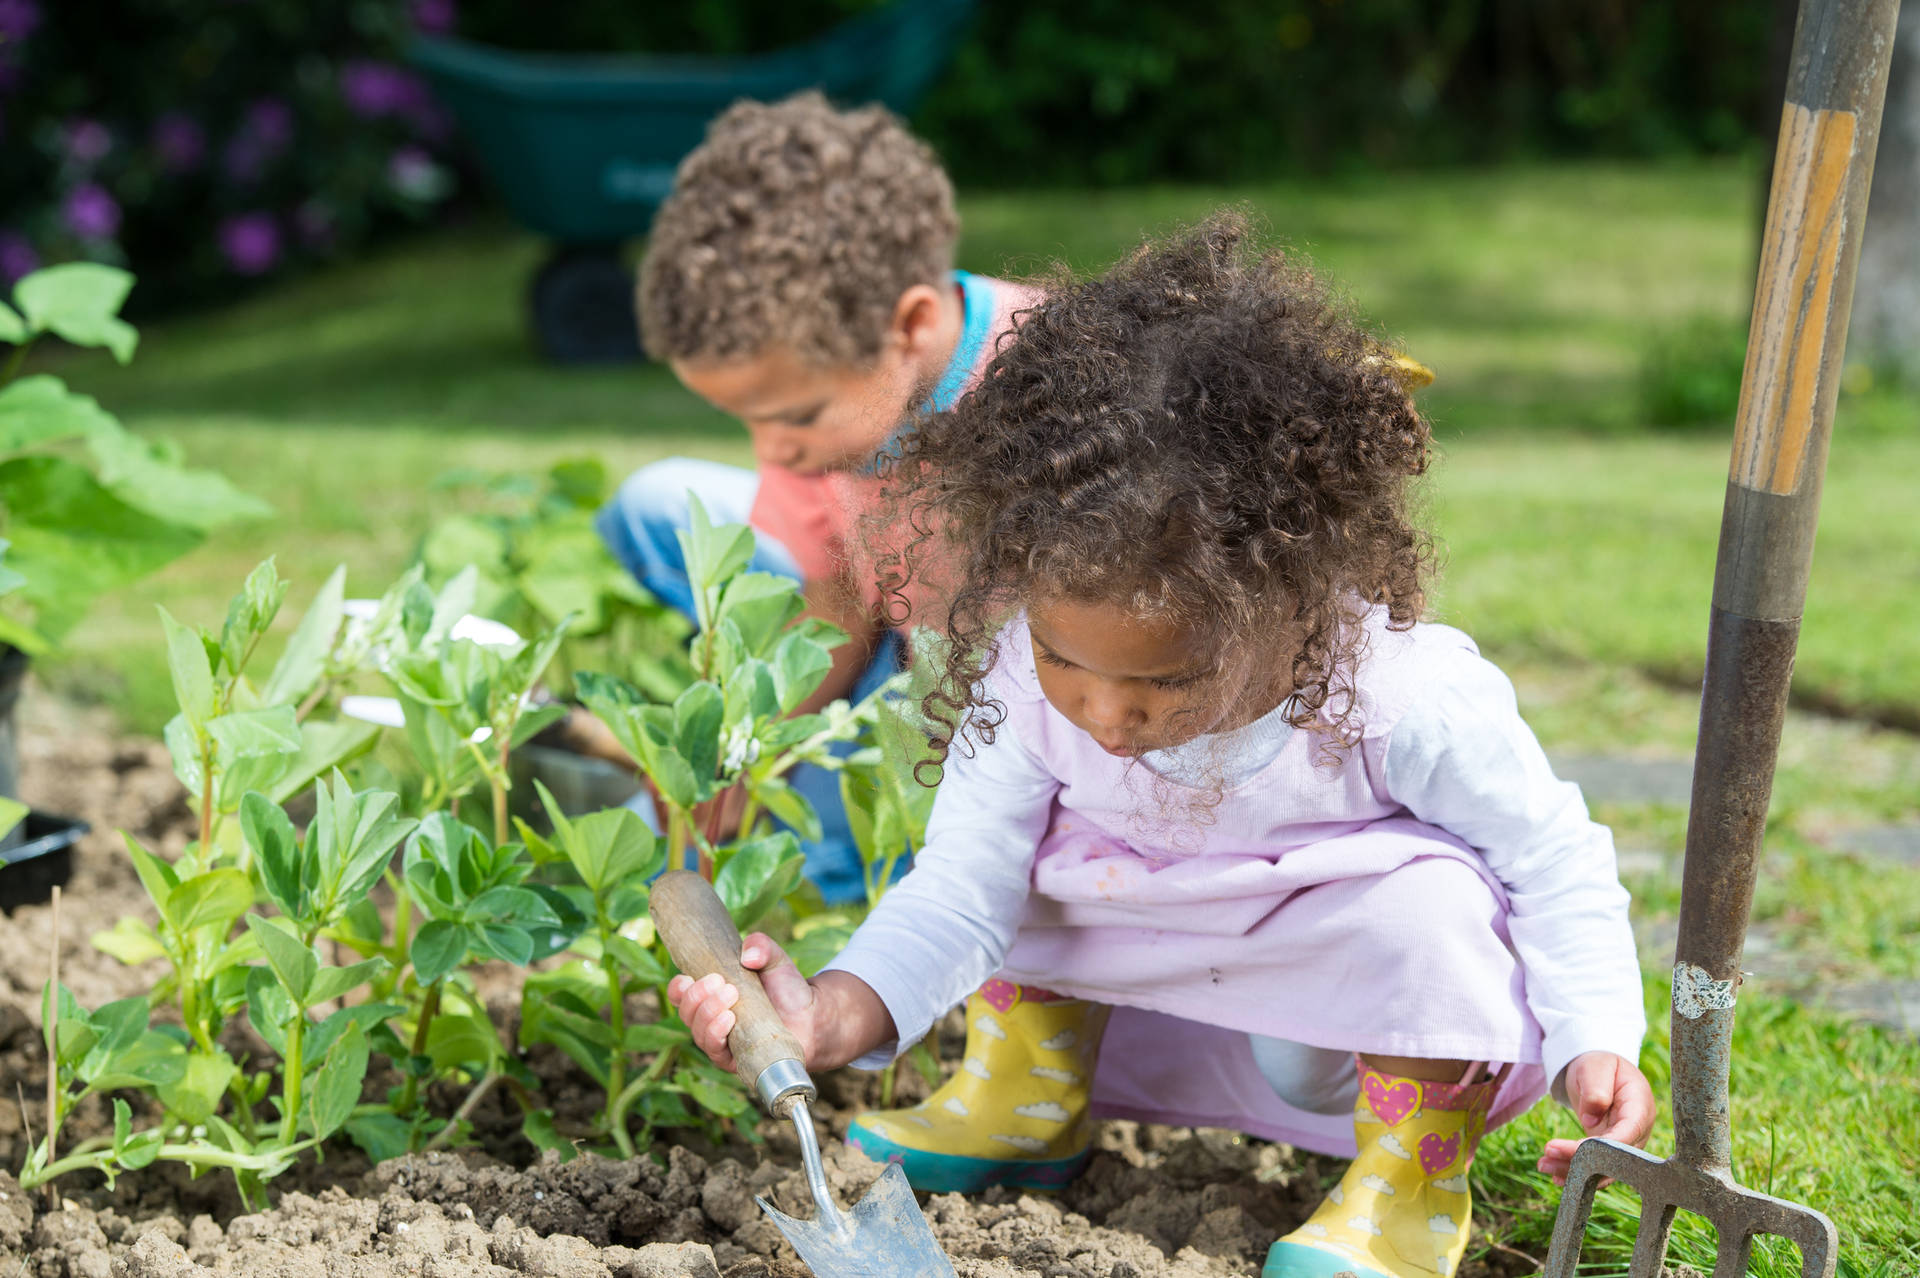 Planting Kids With Gardening Tools Background